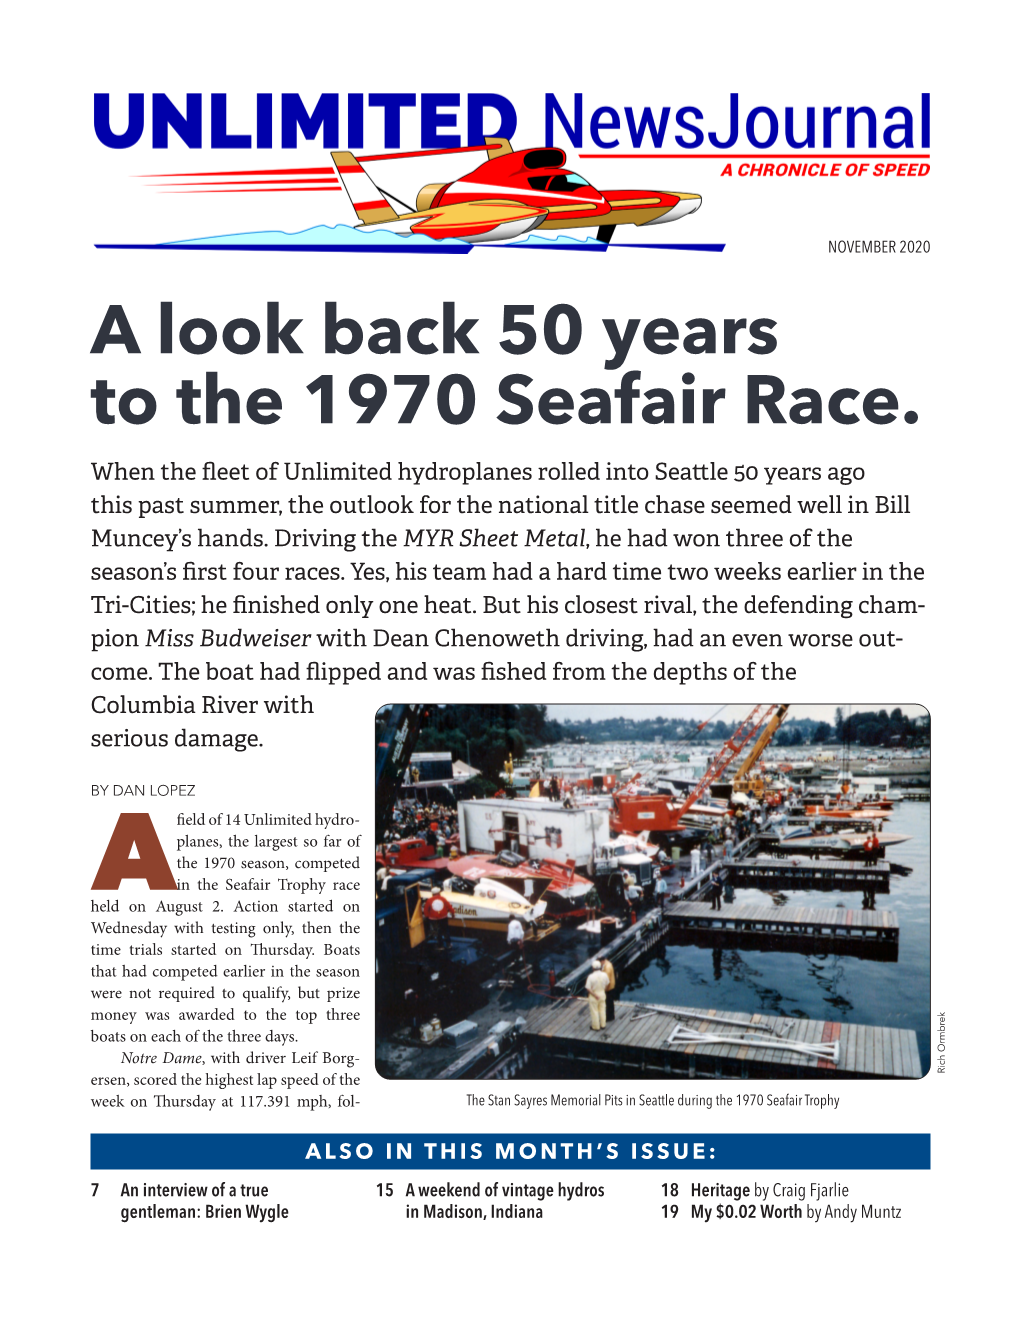 A Look Back 50 Years to the 1970 Seafair Race